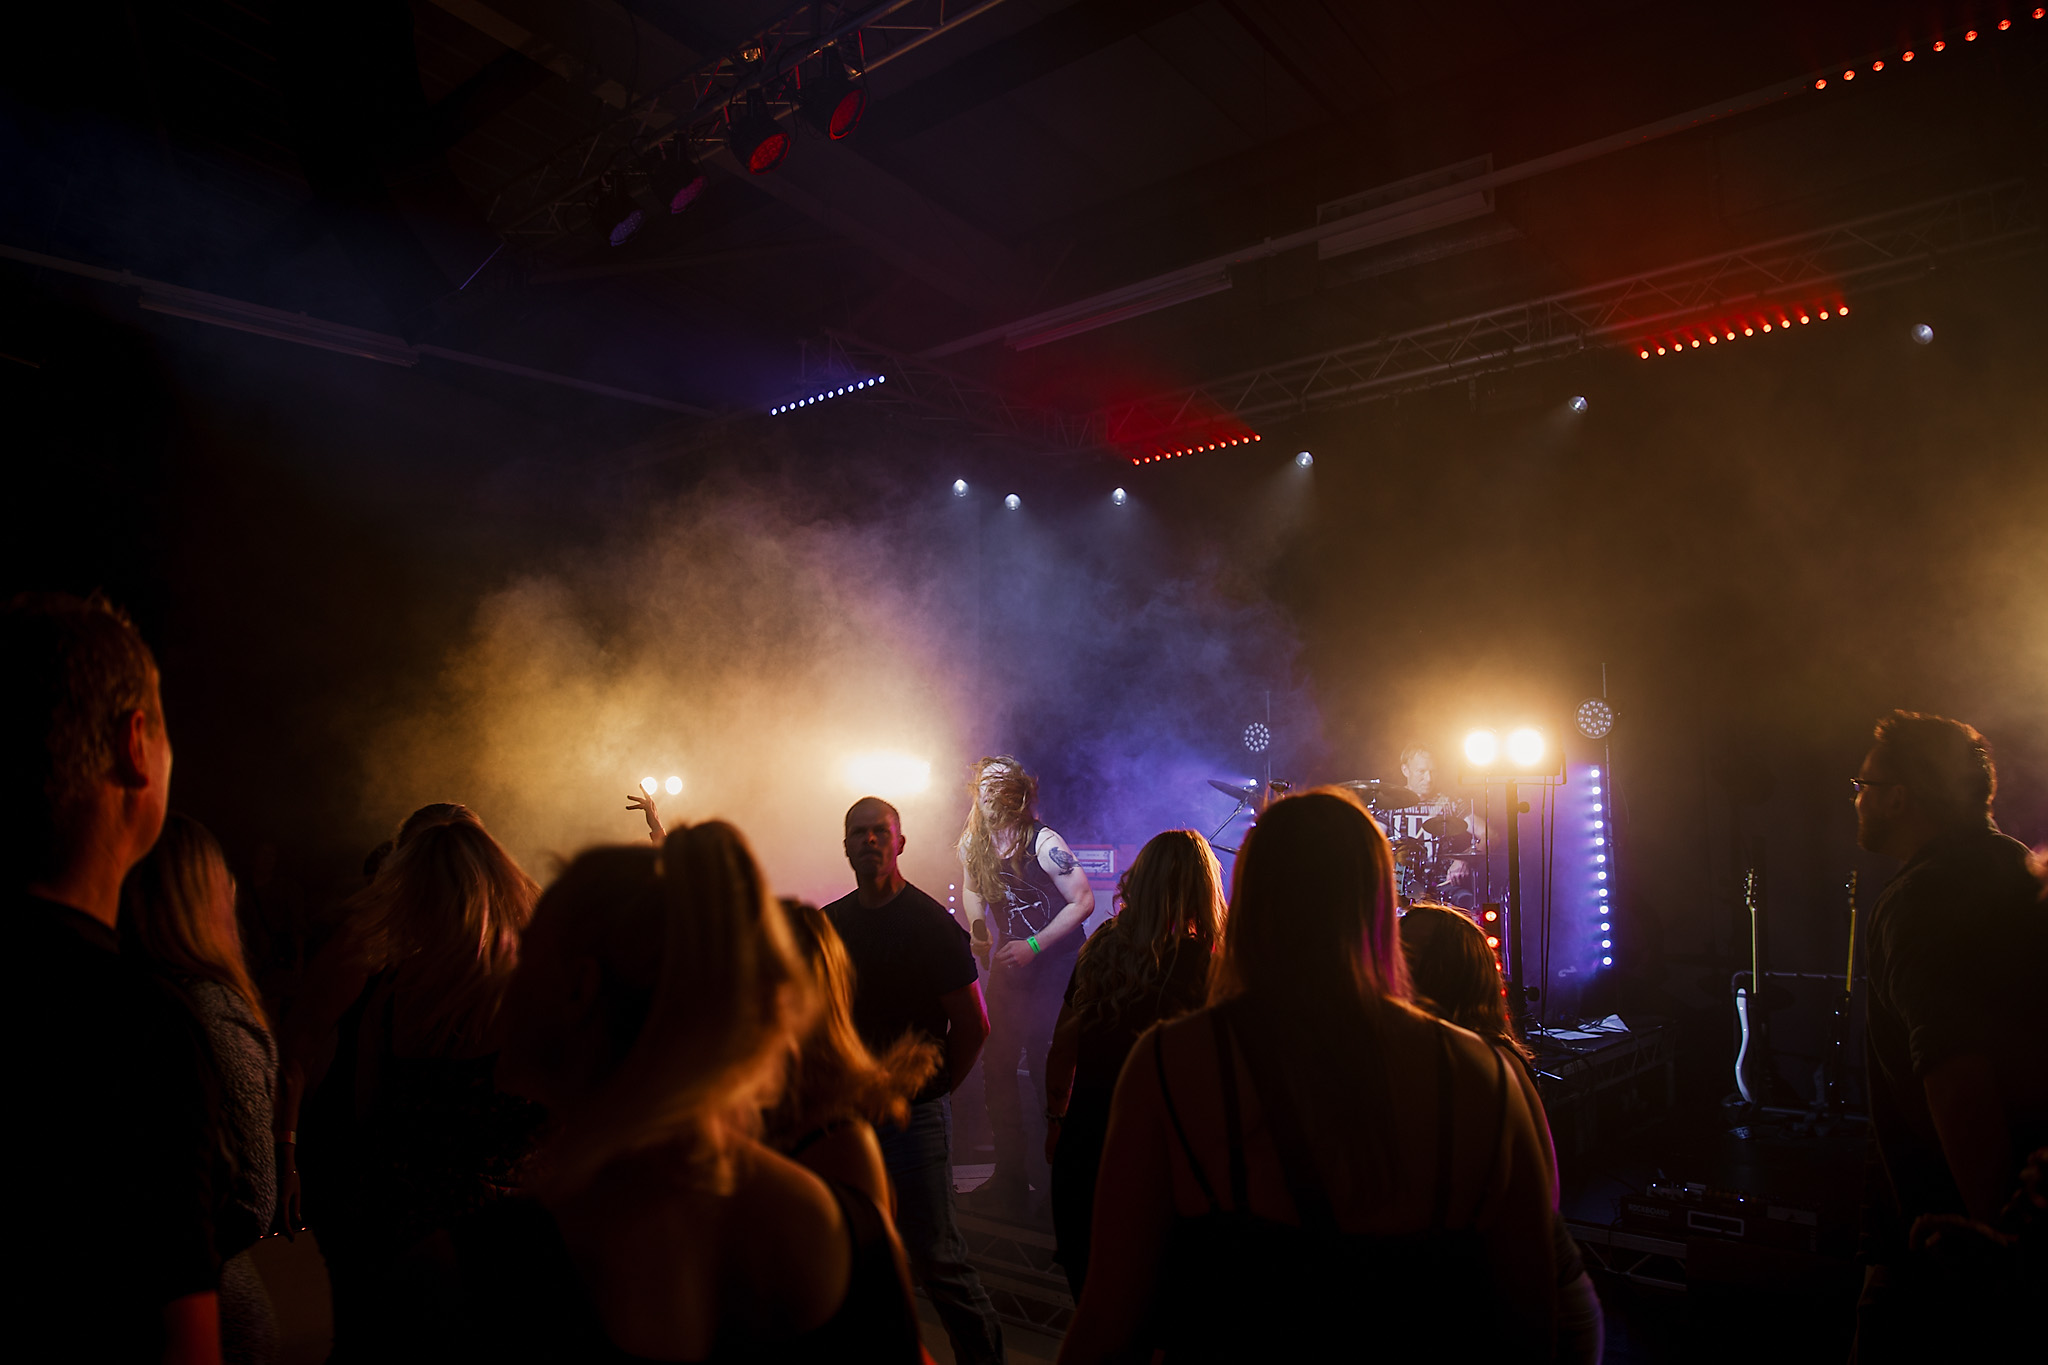 Just a taster of what Eastbourne Music Fest events are like - Bringing Together The Best Live Cover Bands To Create An Unforgettable Immersive Music Experience. #Eastbourne Music Fest